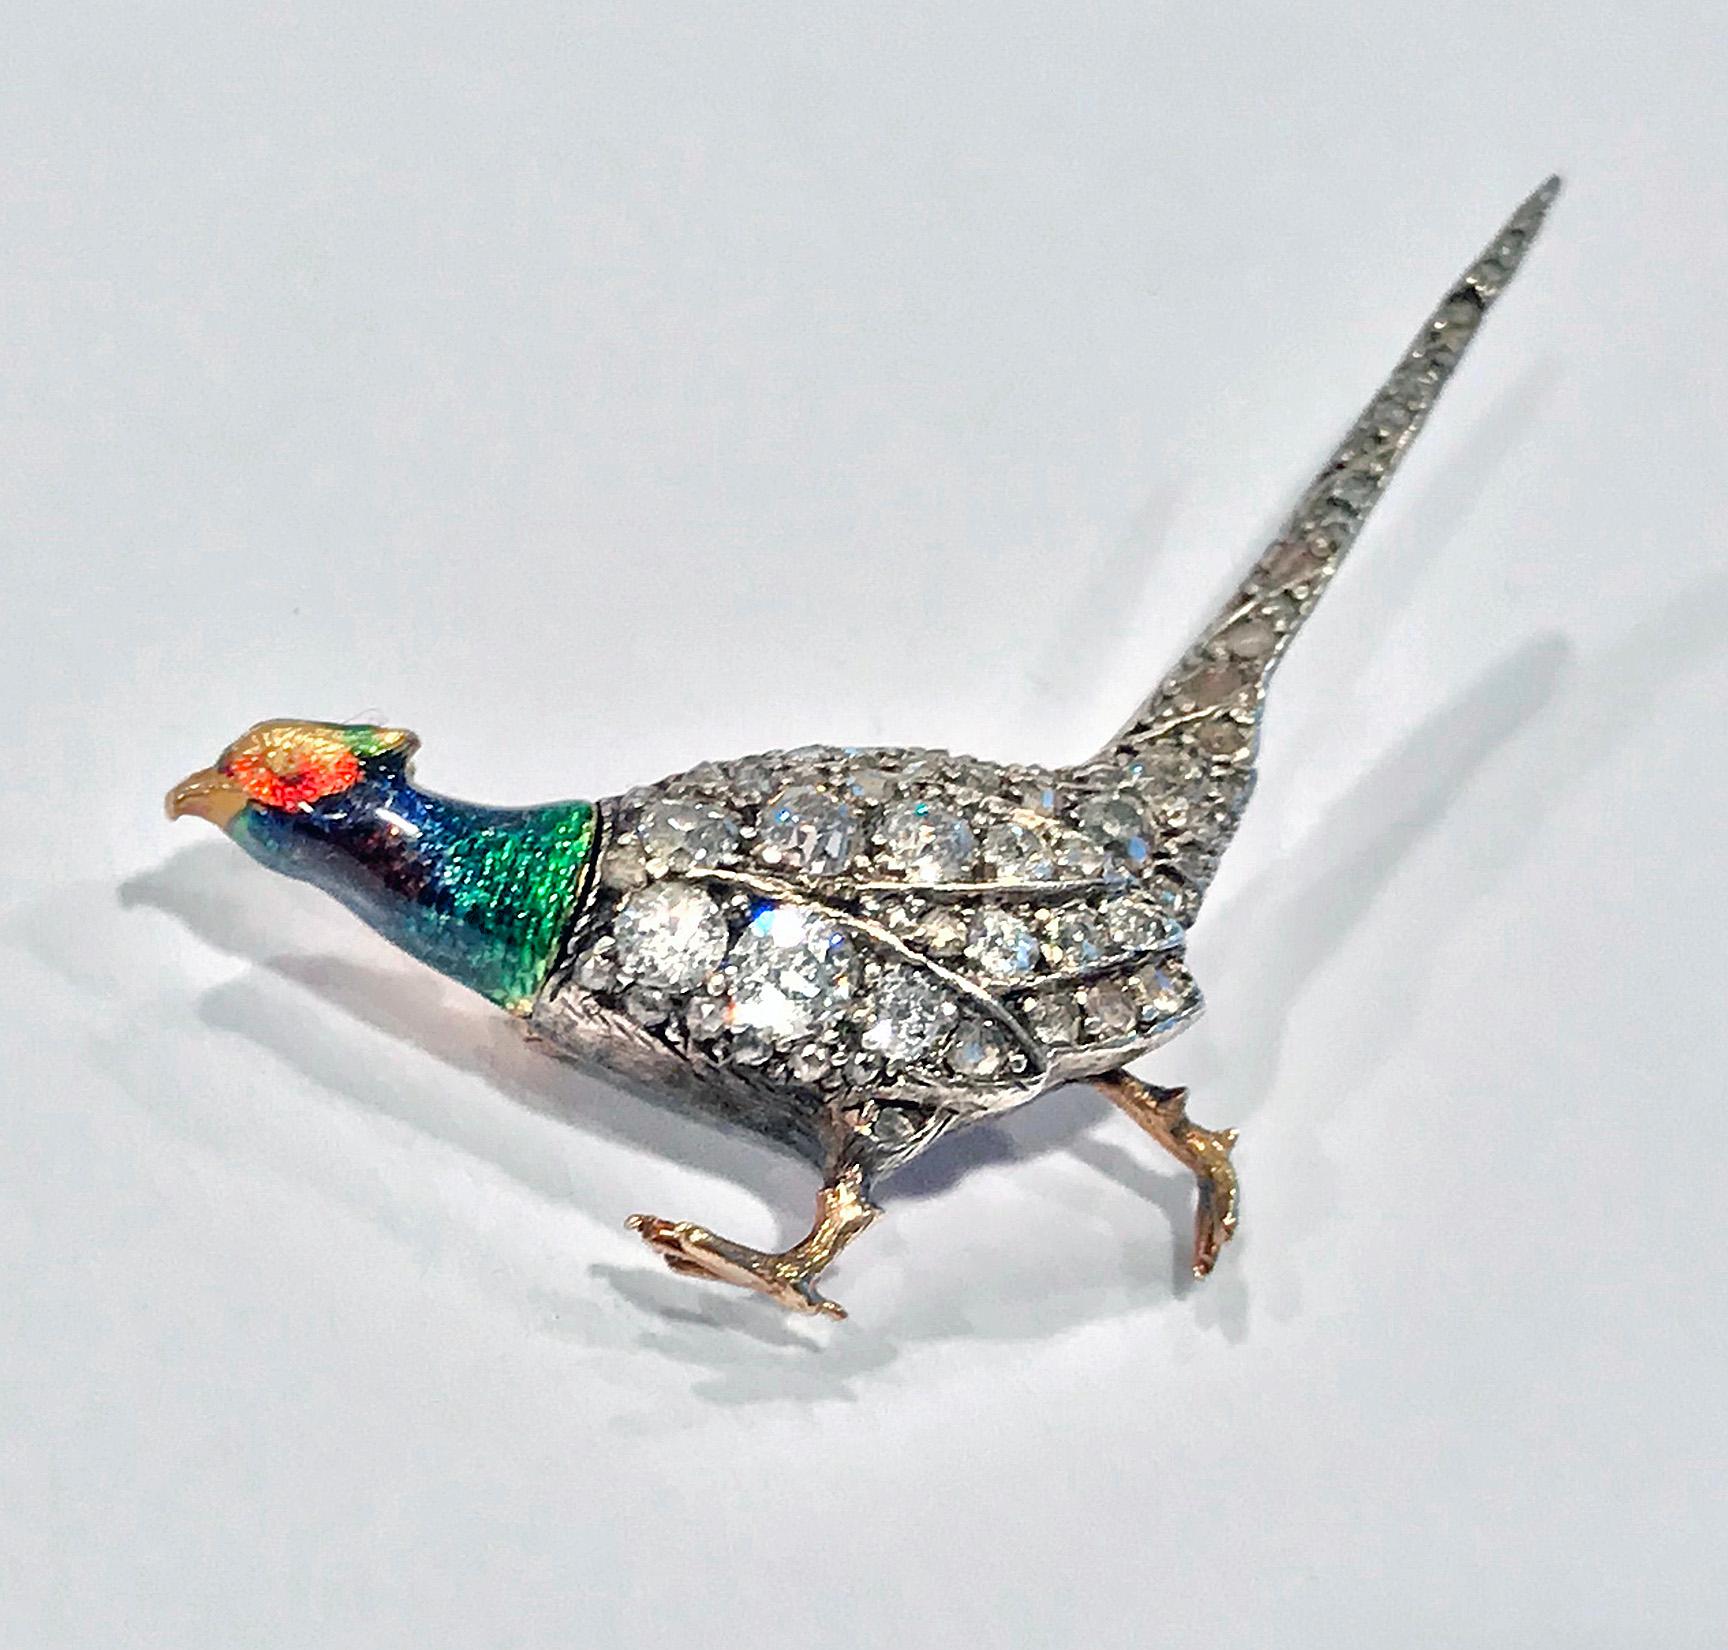 Antique Enamel and Diamond Pheasant Brooch, English C.1880. The body and tail encrusted with numerous old mine, european and rose cut diamonds. The head with striking green, blue, orange, gold and tones of mauve enamel. All set in gold on cut down